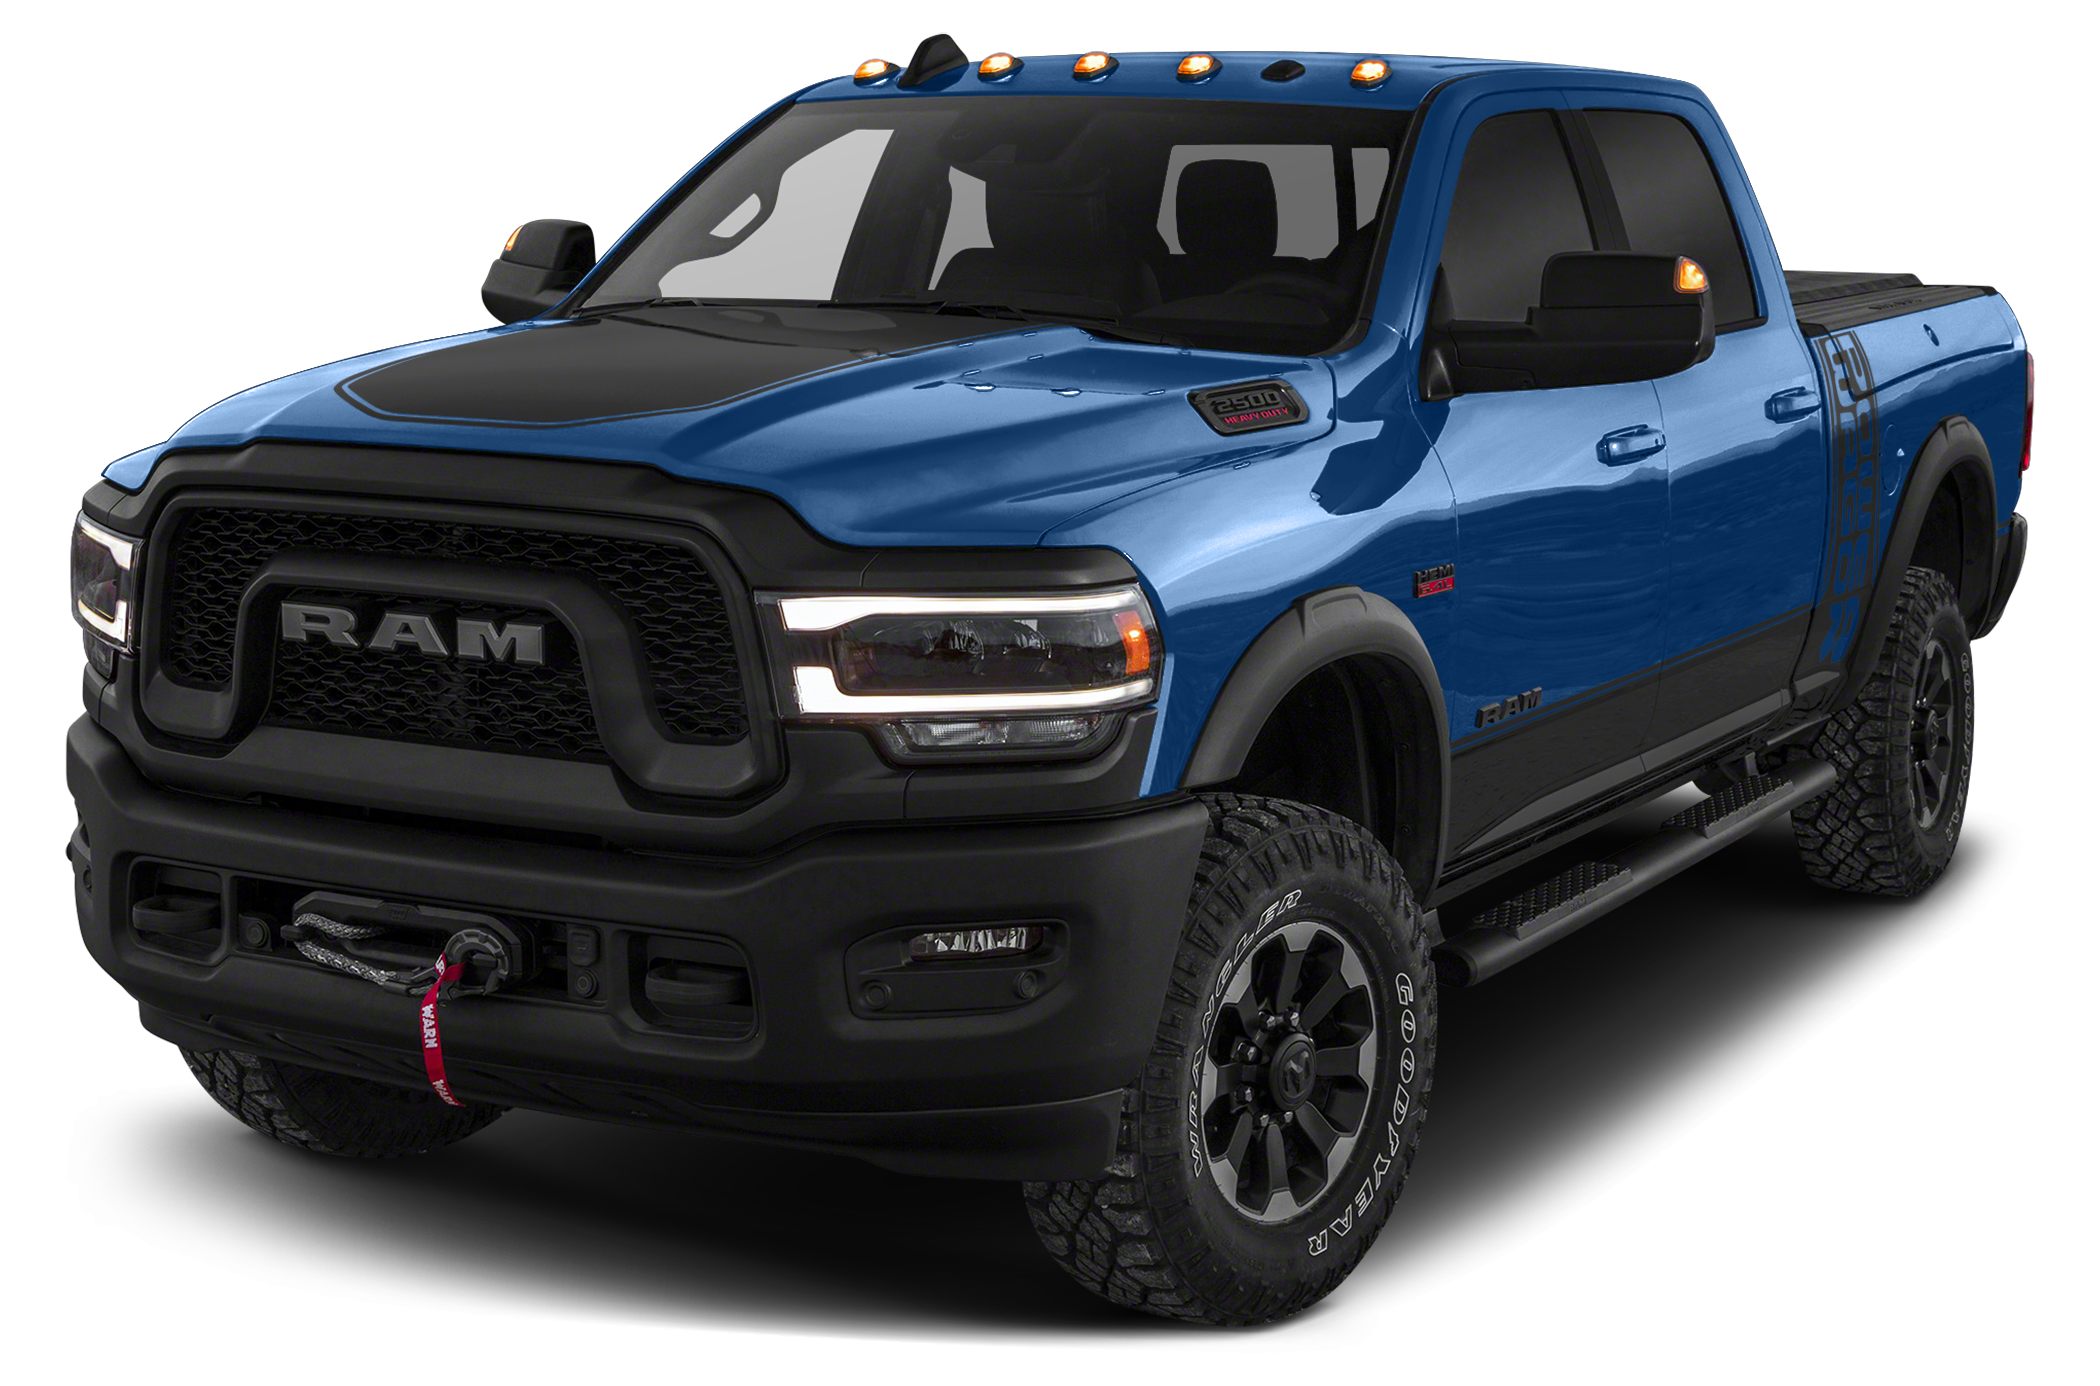 2019 RAM 2500 Power Wagon 4x4 Crew Cab 149 in. WB Specs and Prices